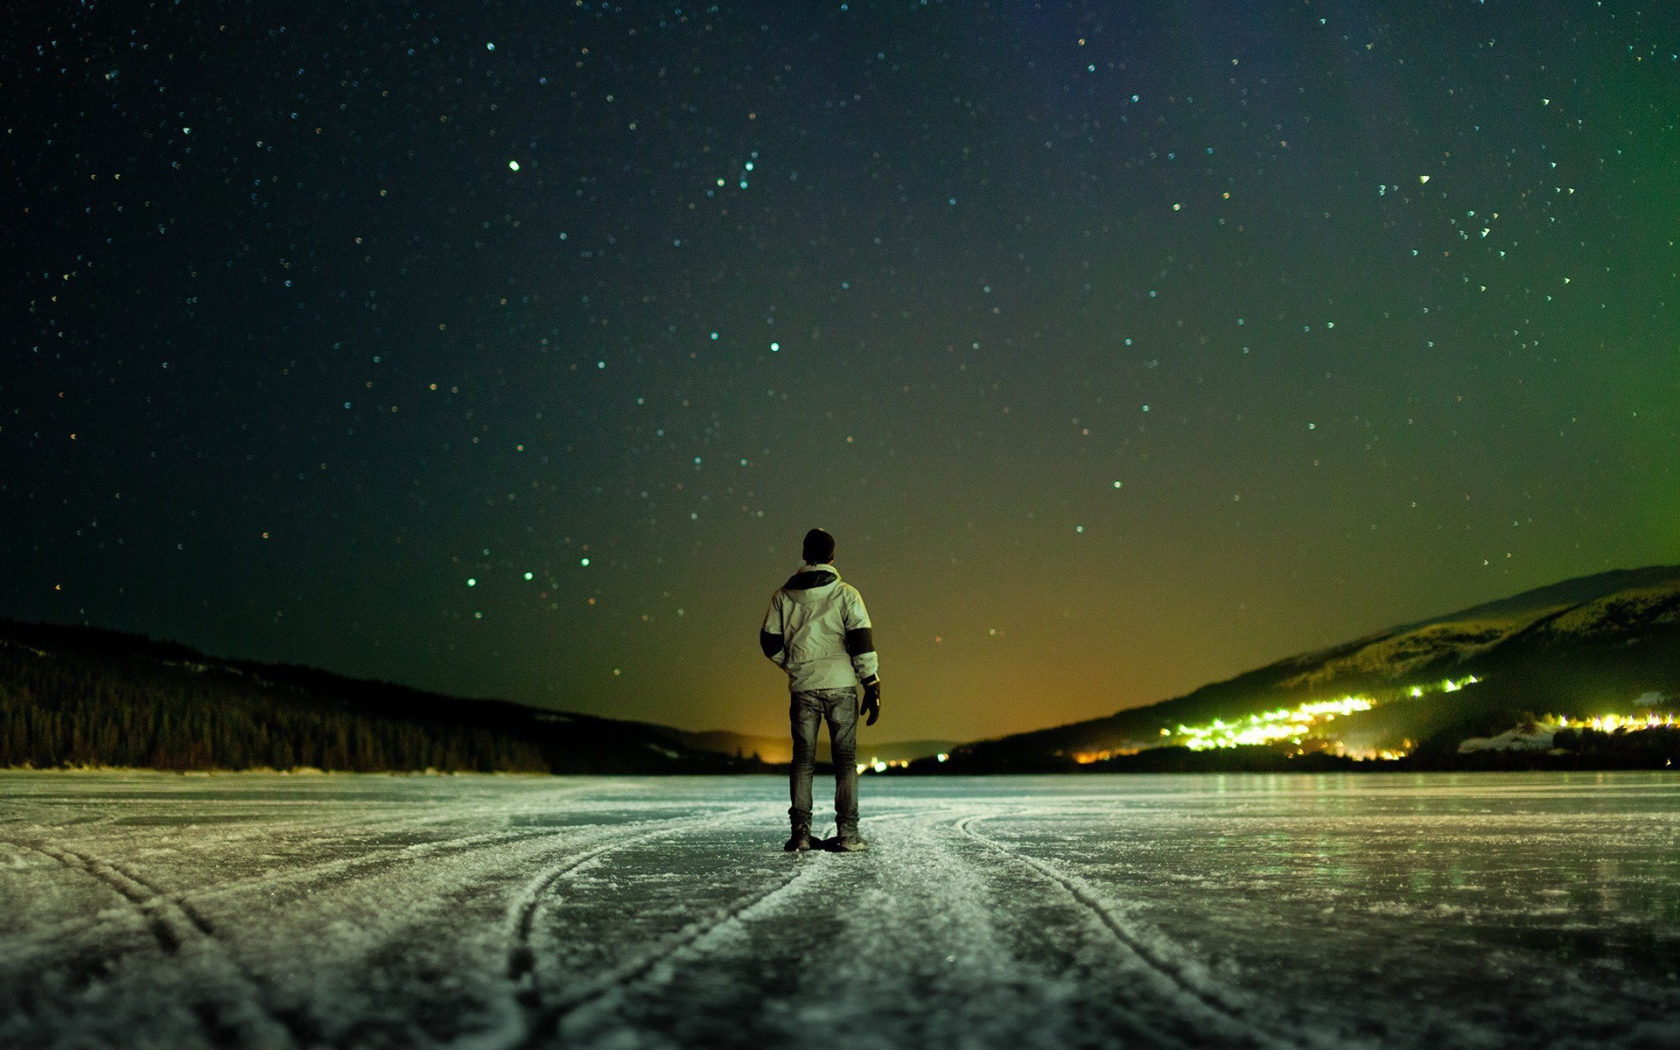 The man on the ice looking up at the stars